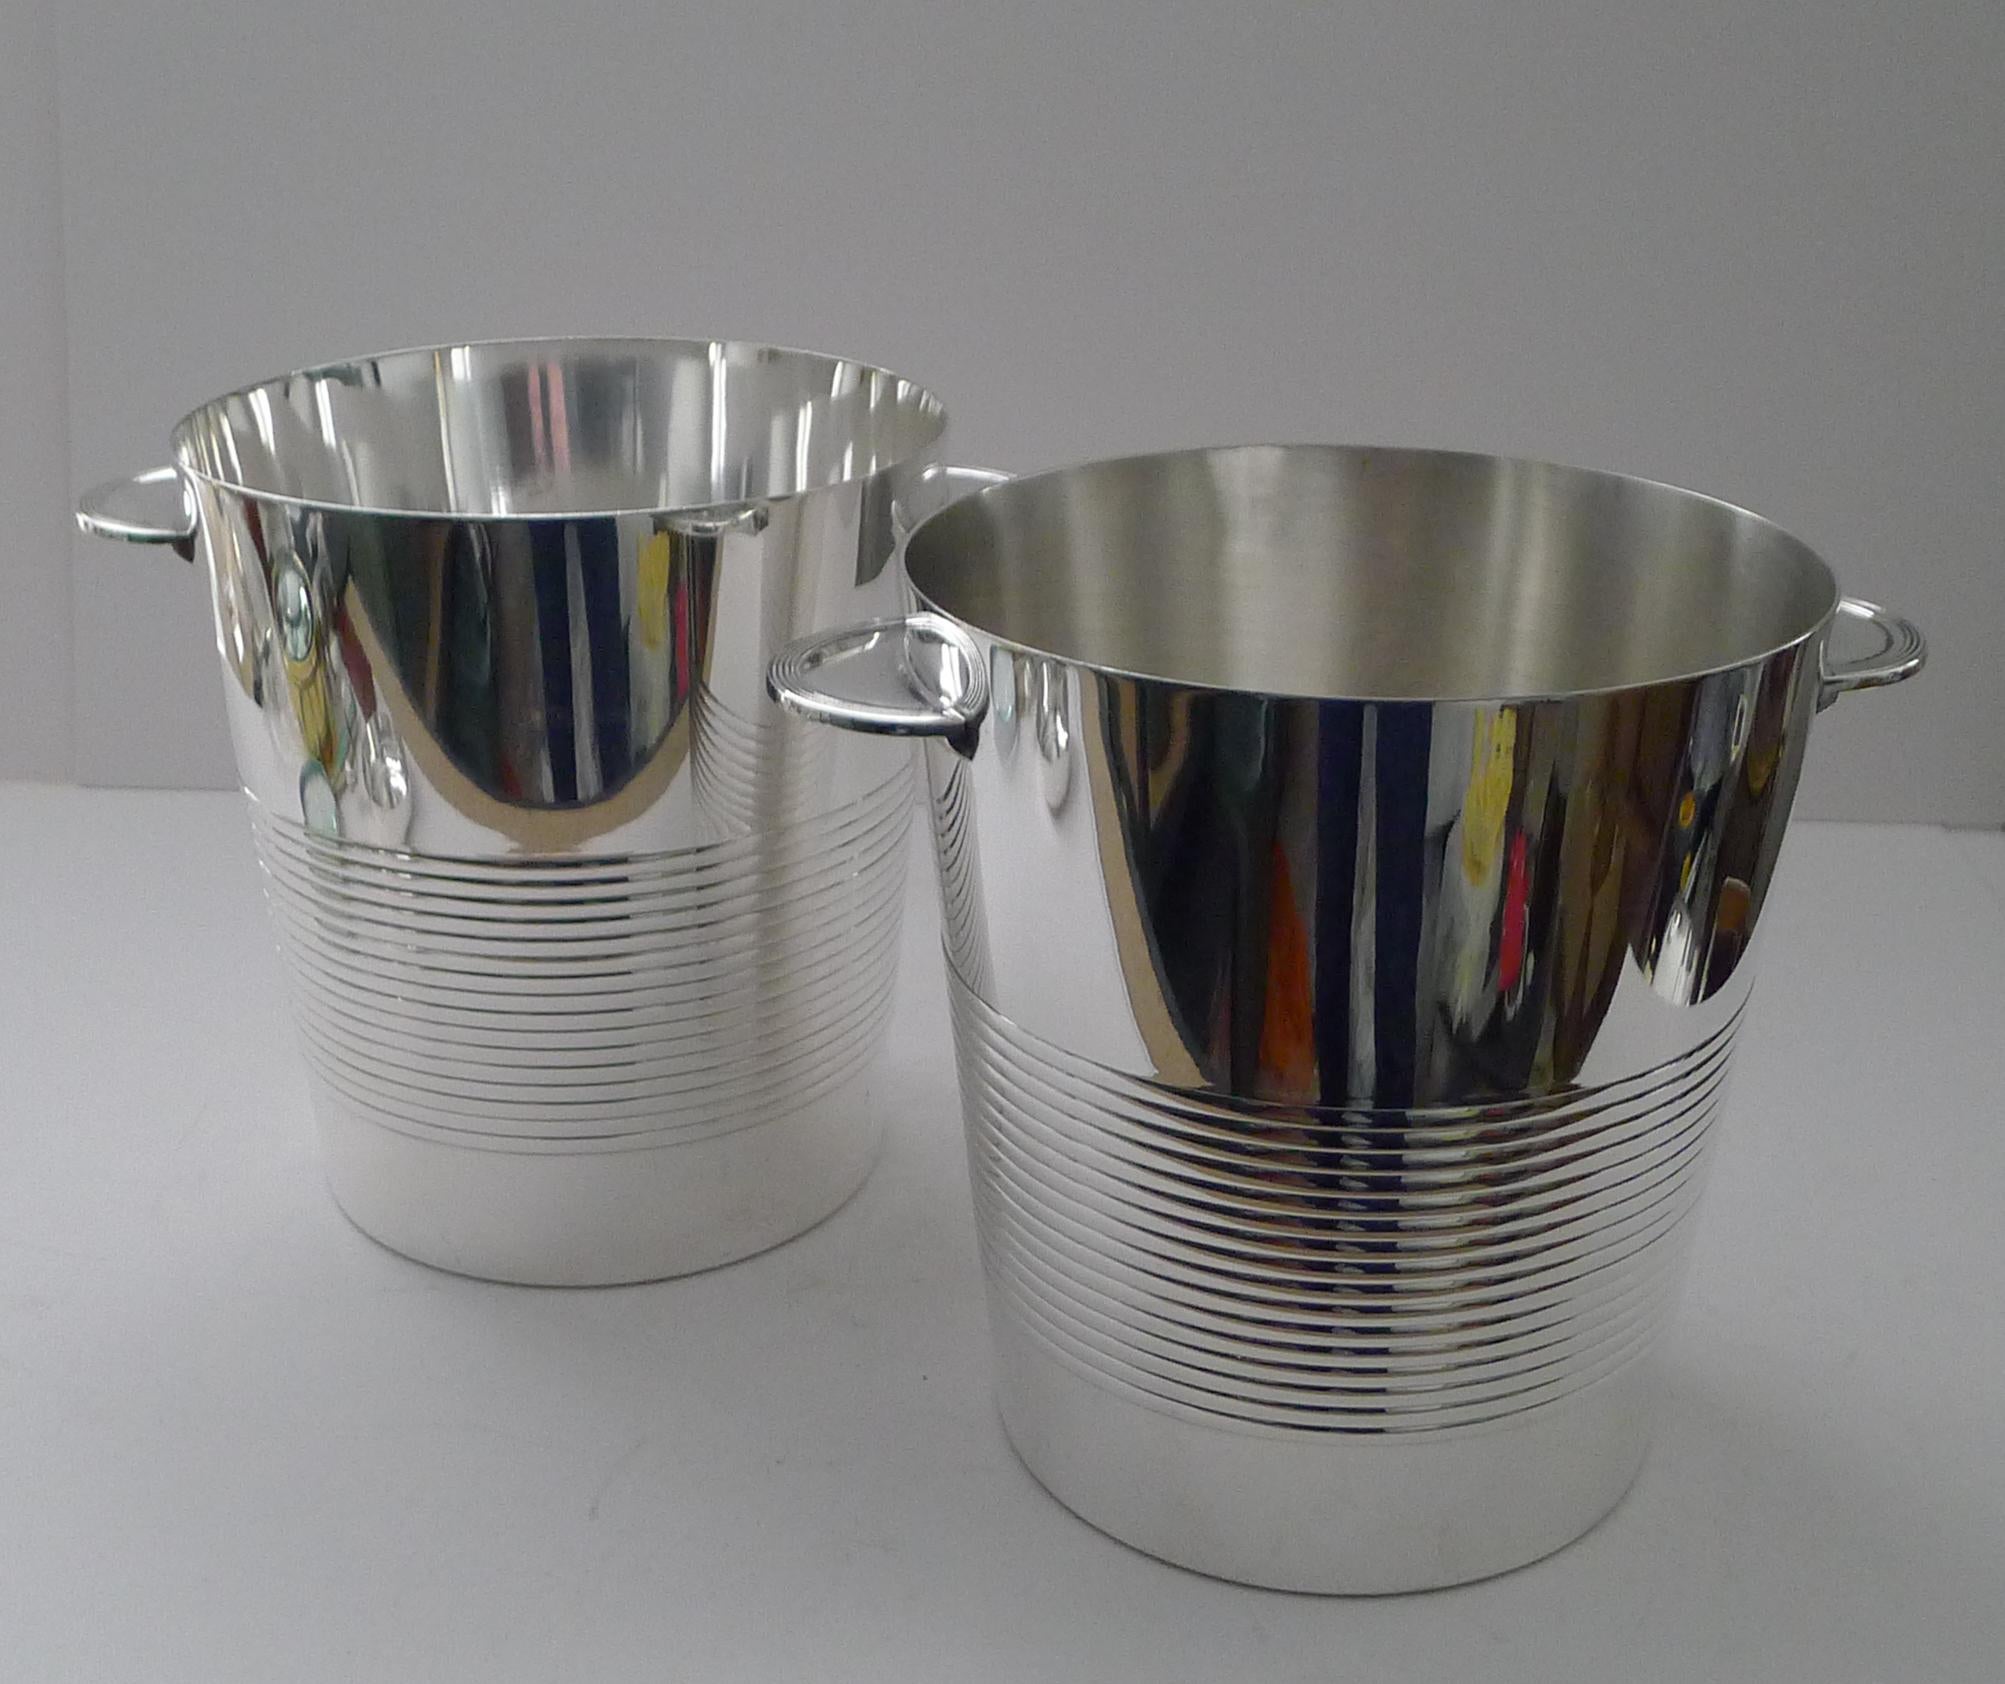 Art Deco Luc Lanel for Christofle - Pair Champagne Buckets / Wine Coolers - Vulcan c.1940 For Sale